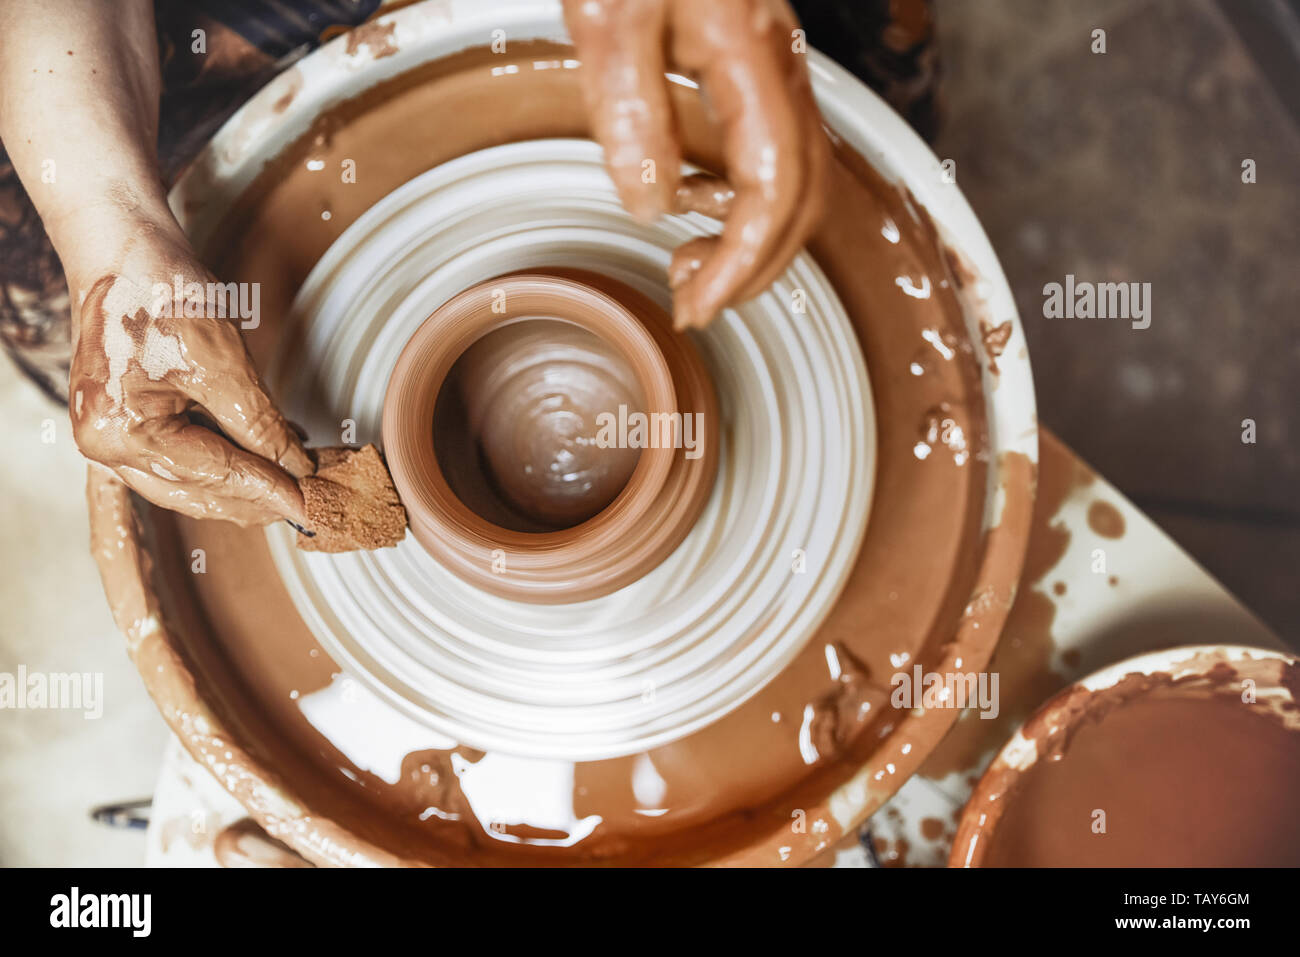 A spinning potter's wheel with a vessel. Close-up Stock Photo